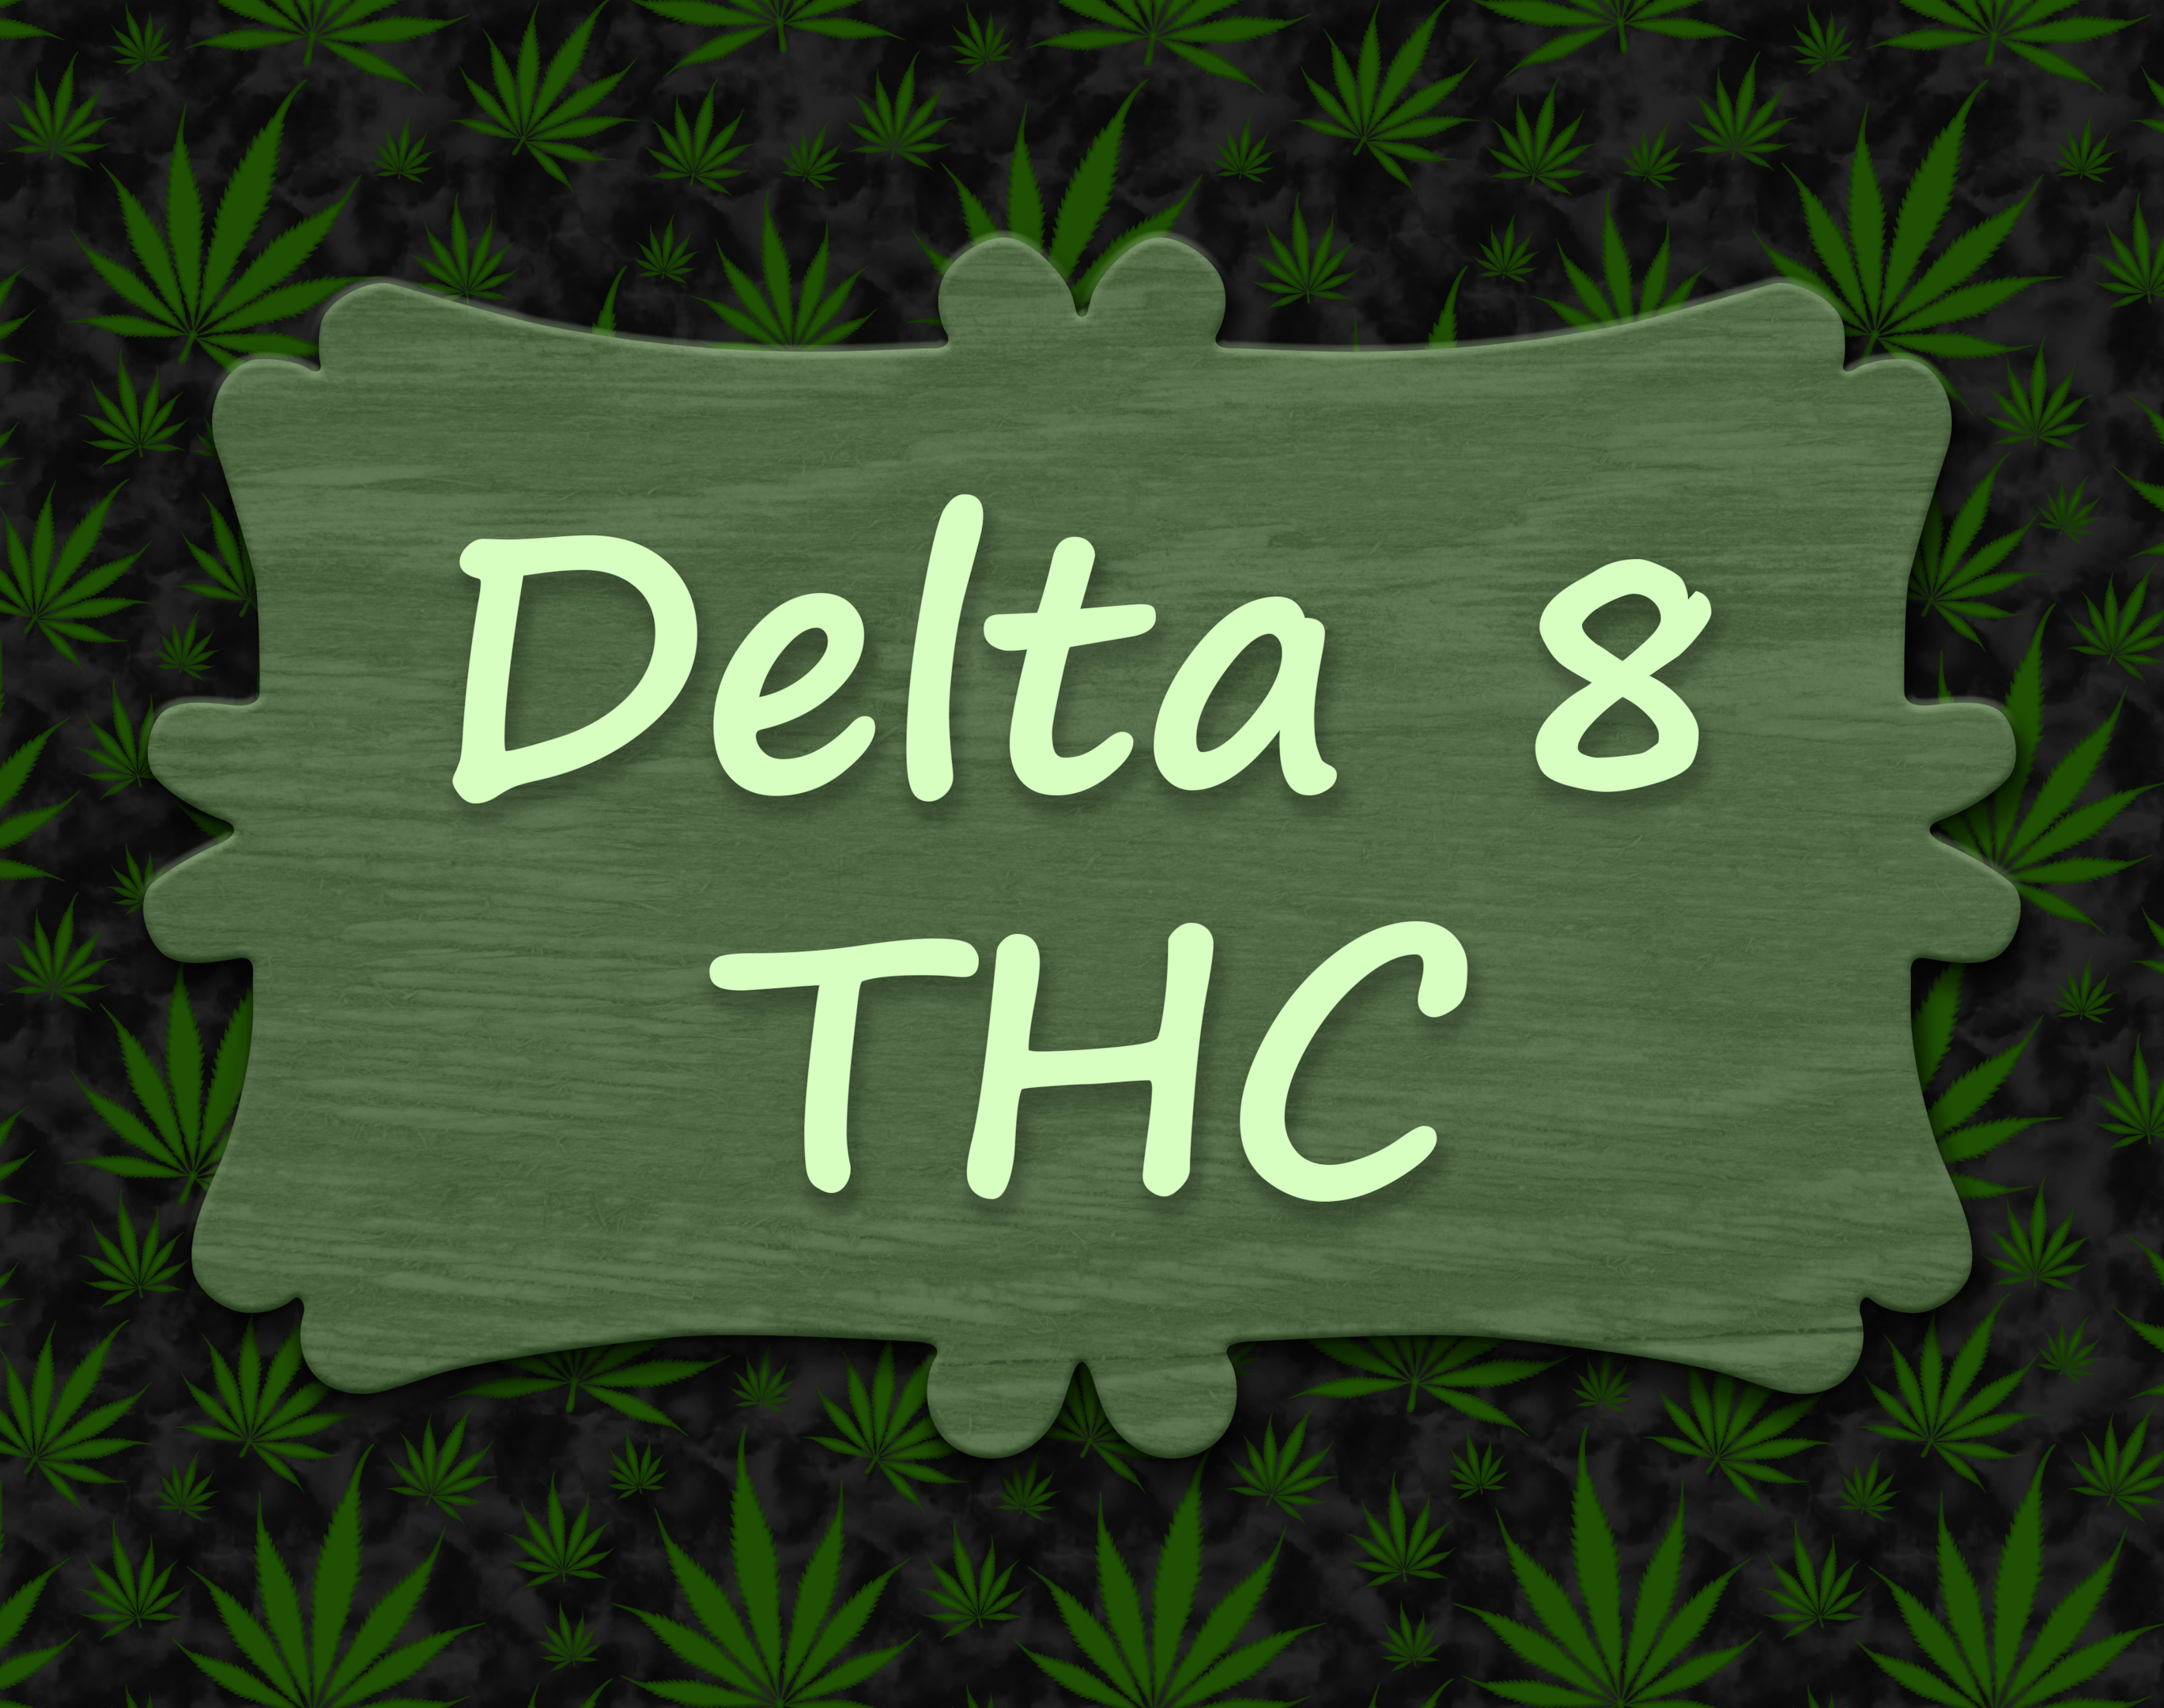 Delta 8 THC combined in our disposable vape pod with a full spectrum CBD oil, CBD CBN, all in a CBD vape pen can combine to certain cannabinoid receptors, has to potential to give many CBD users a more euphoric sensation than they might be used to.